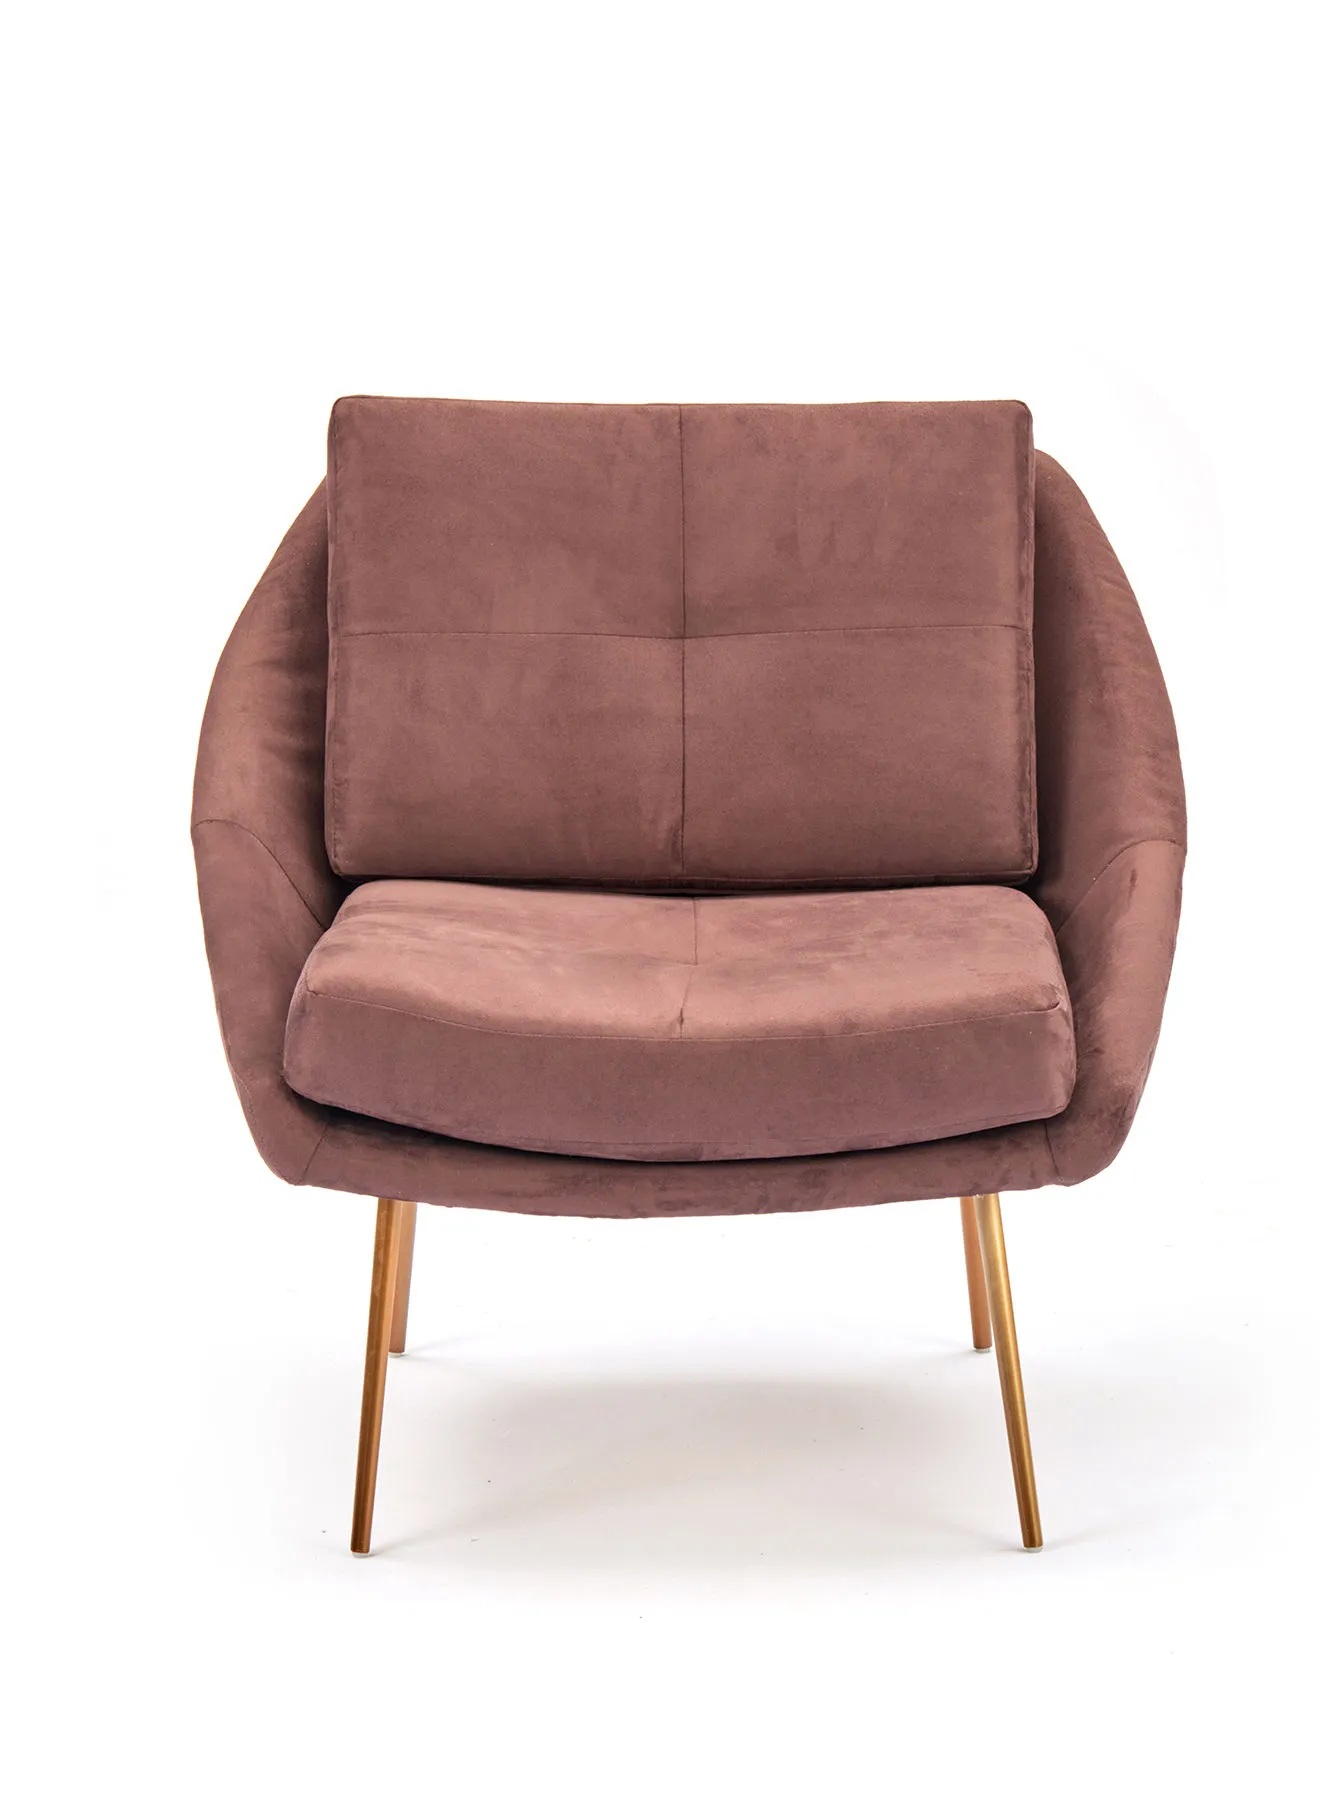 ebb & flow Armchair Luxurious - In Red Wooden Chair Size 820 X 820 X 820